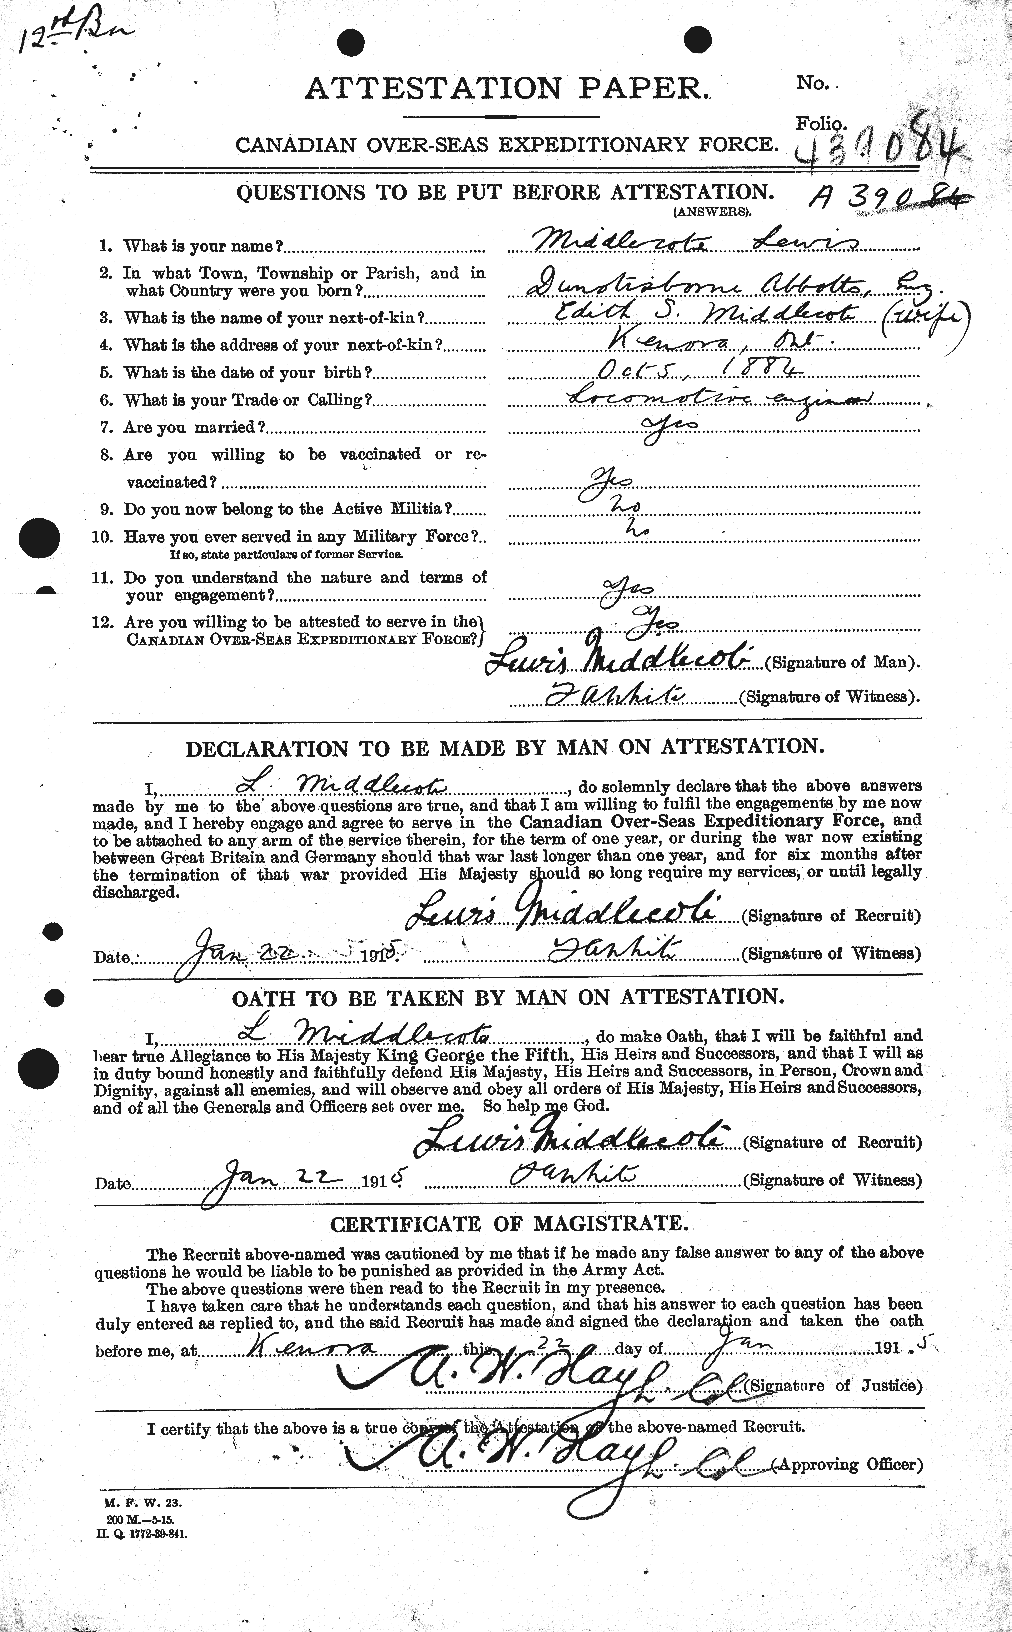 Personnel Records of the First World War - CEF 492972a